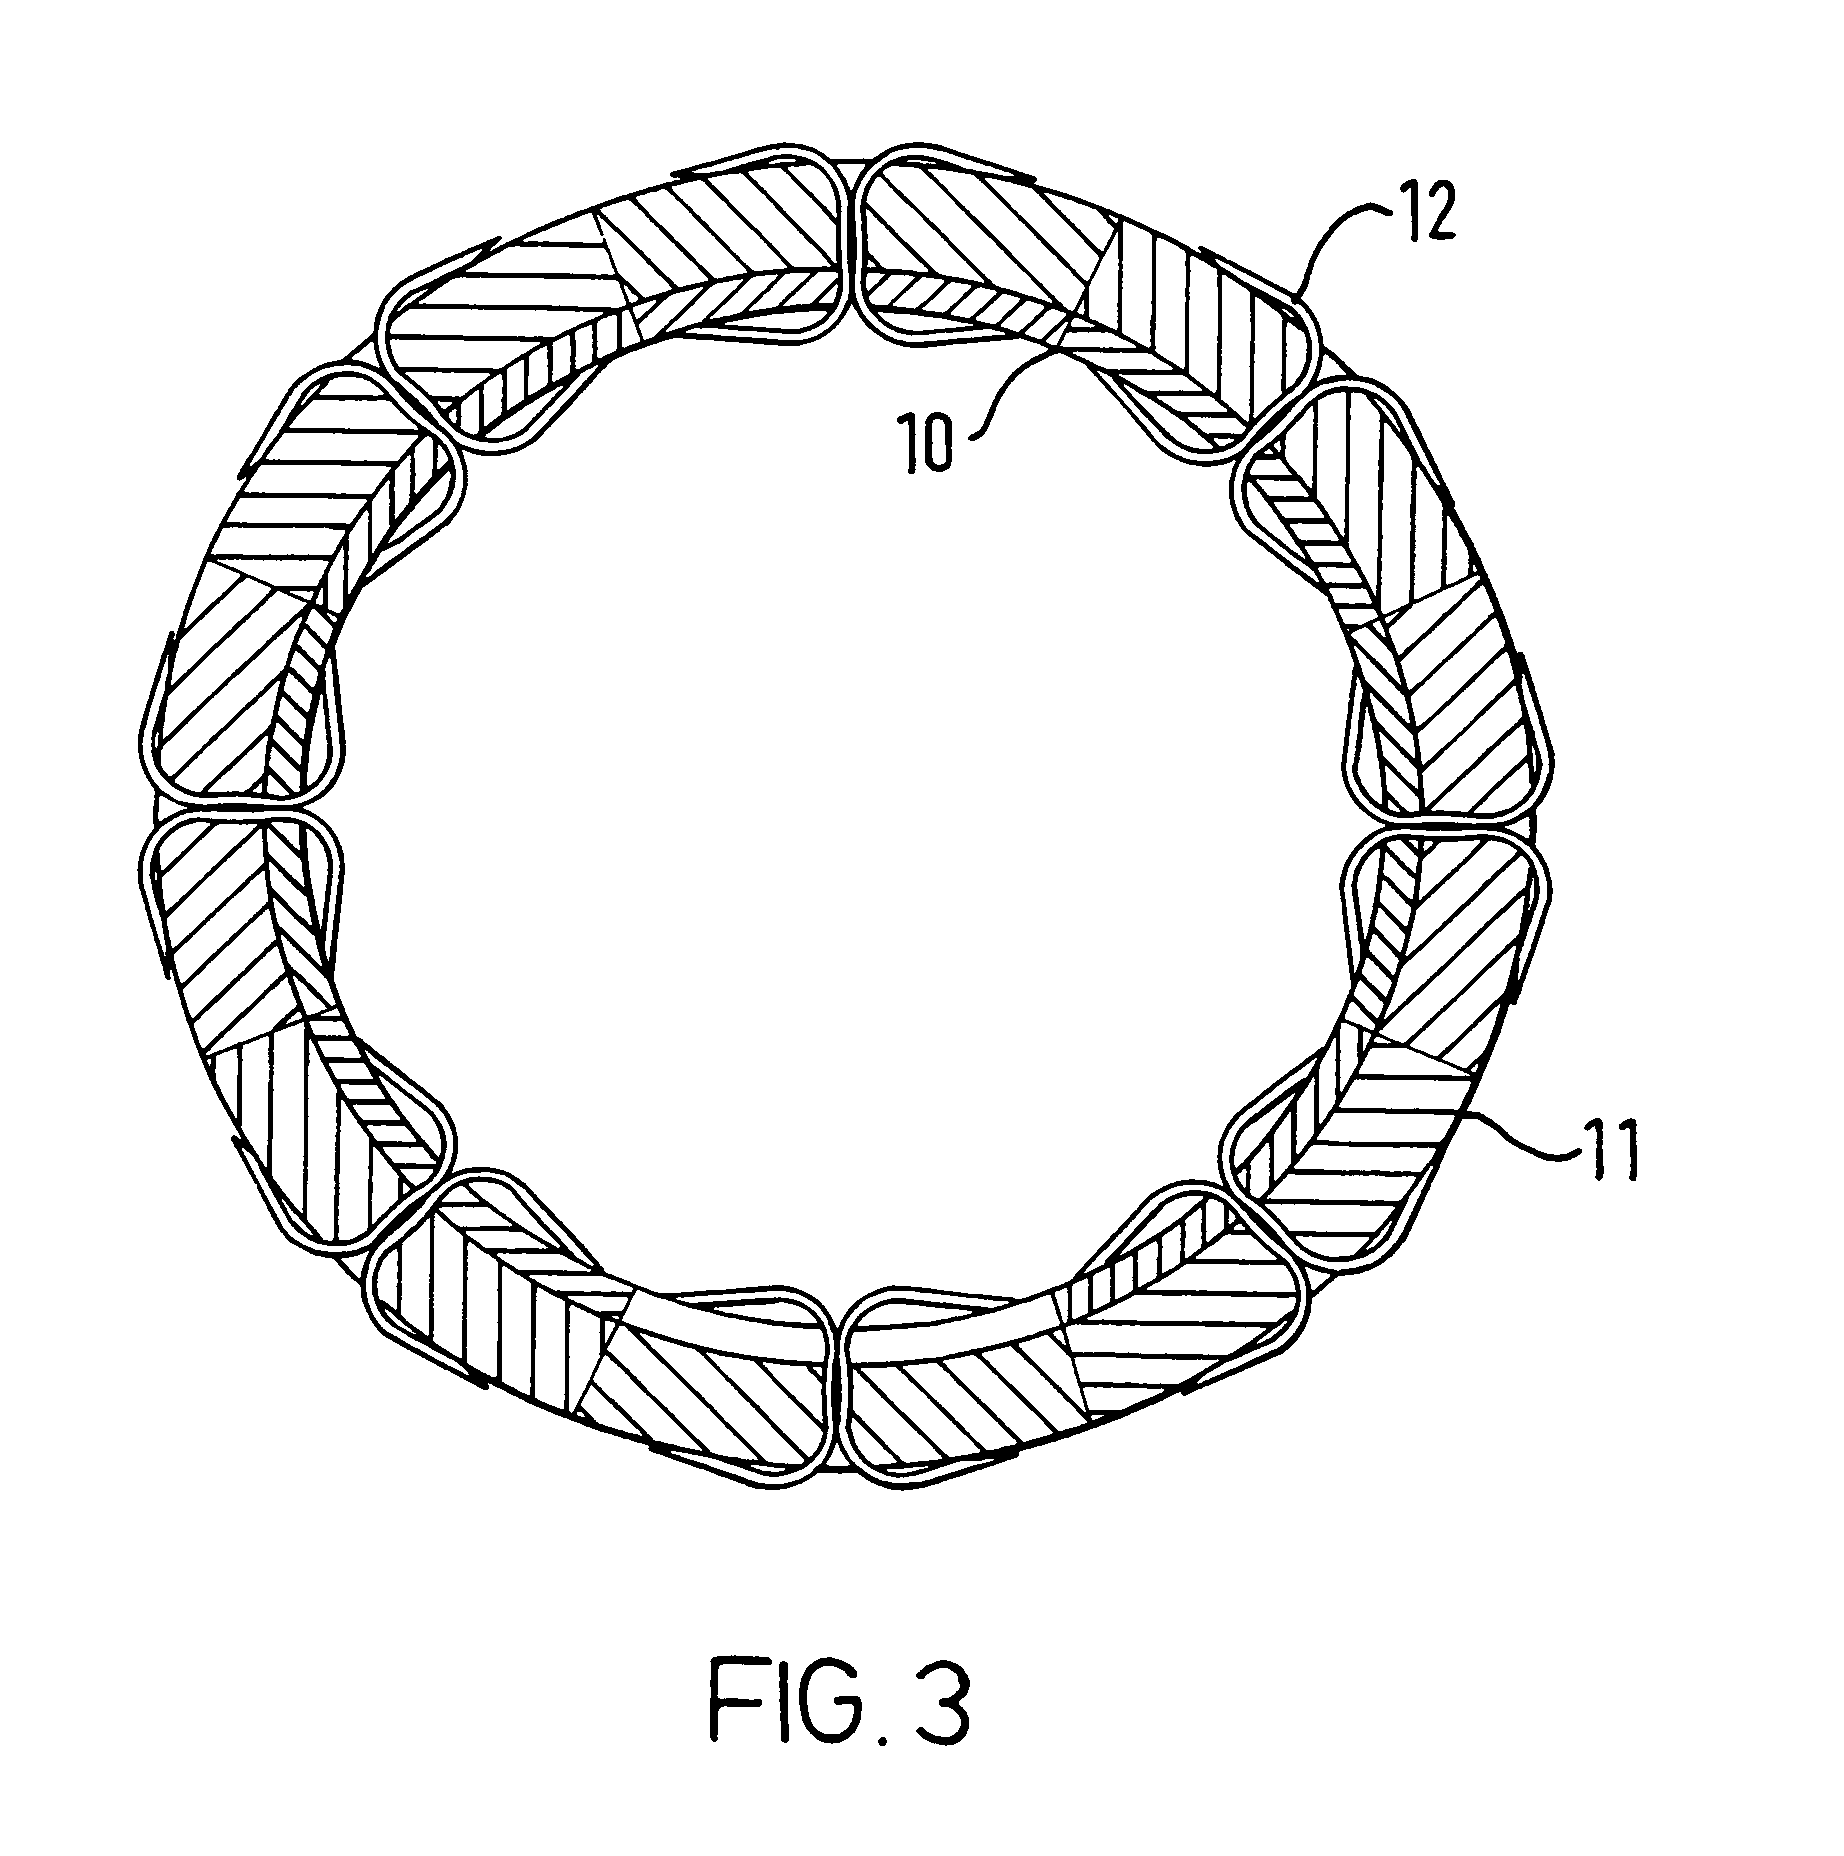 Devices and methods for the repair of arteries